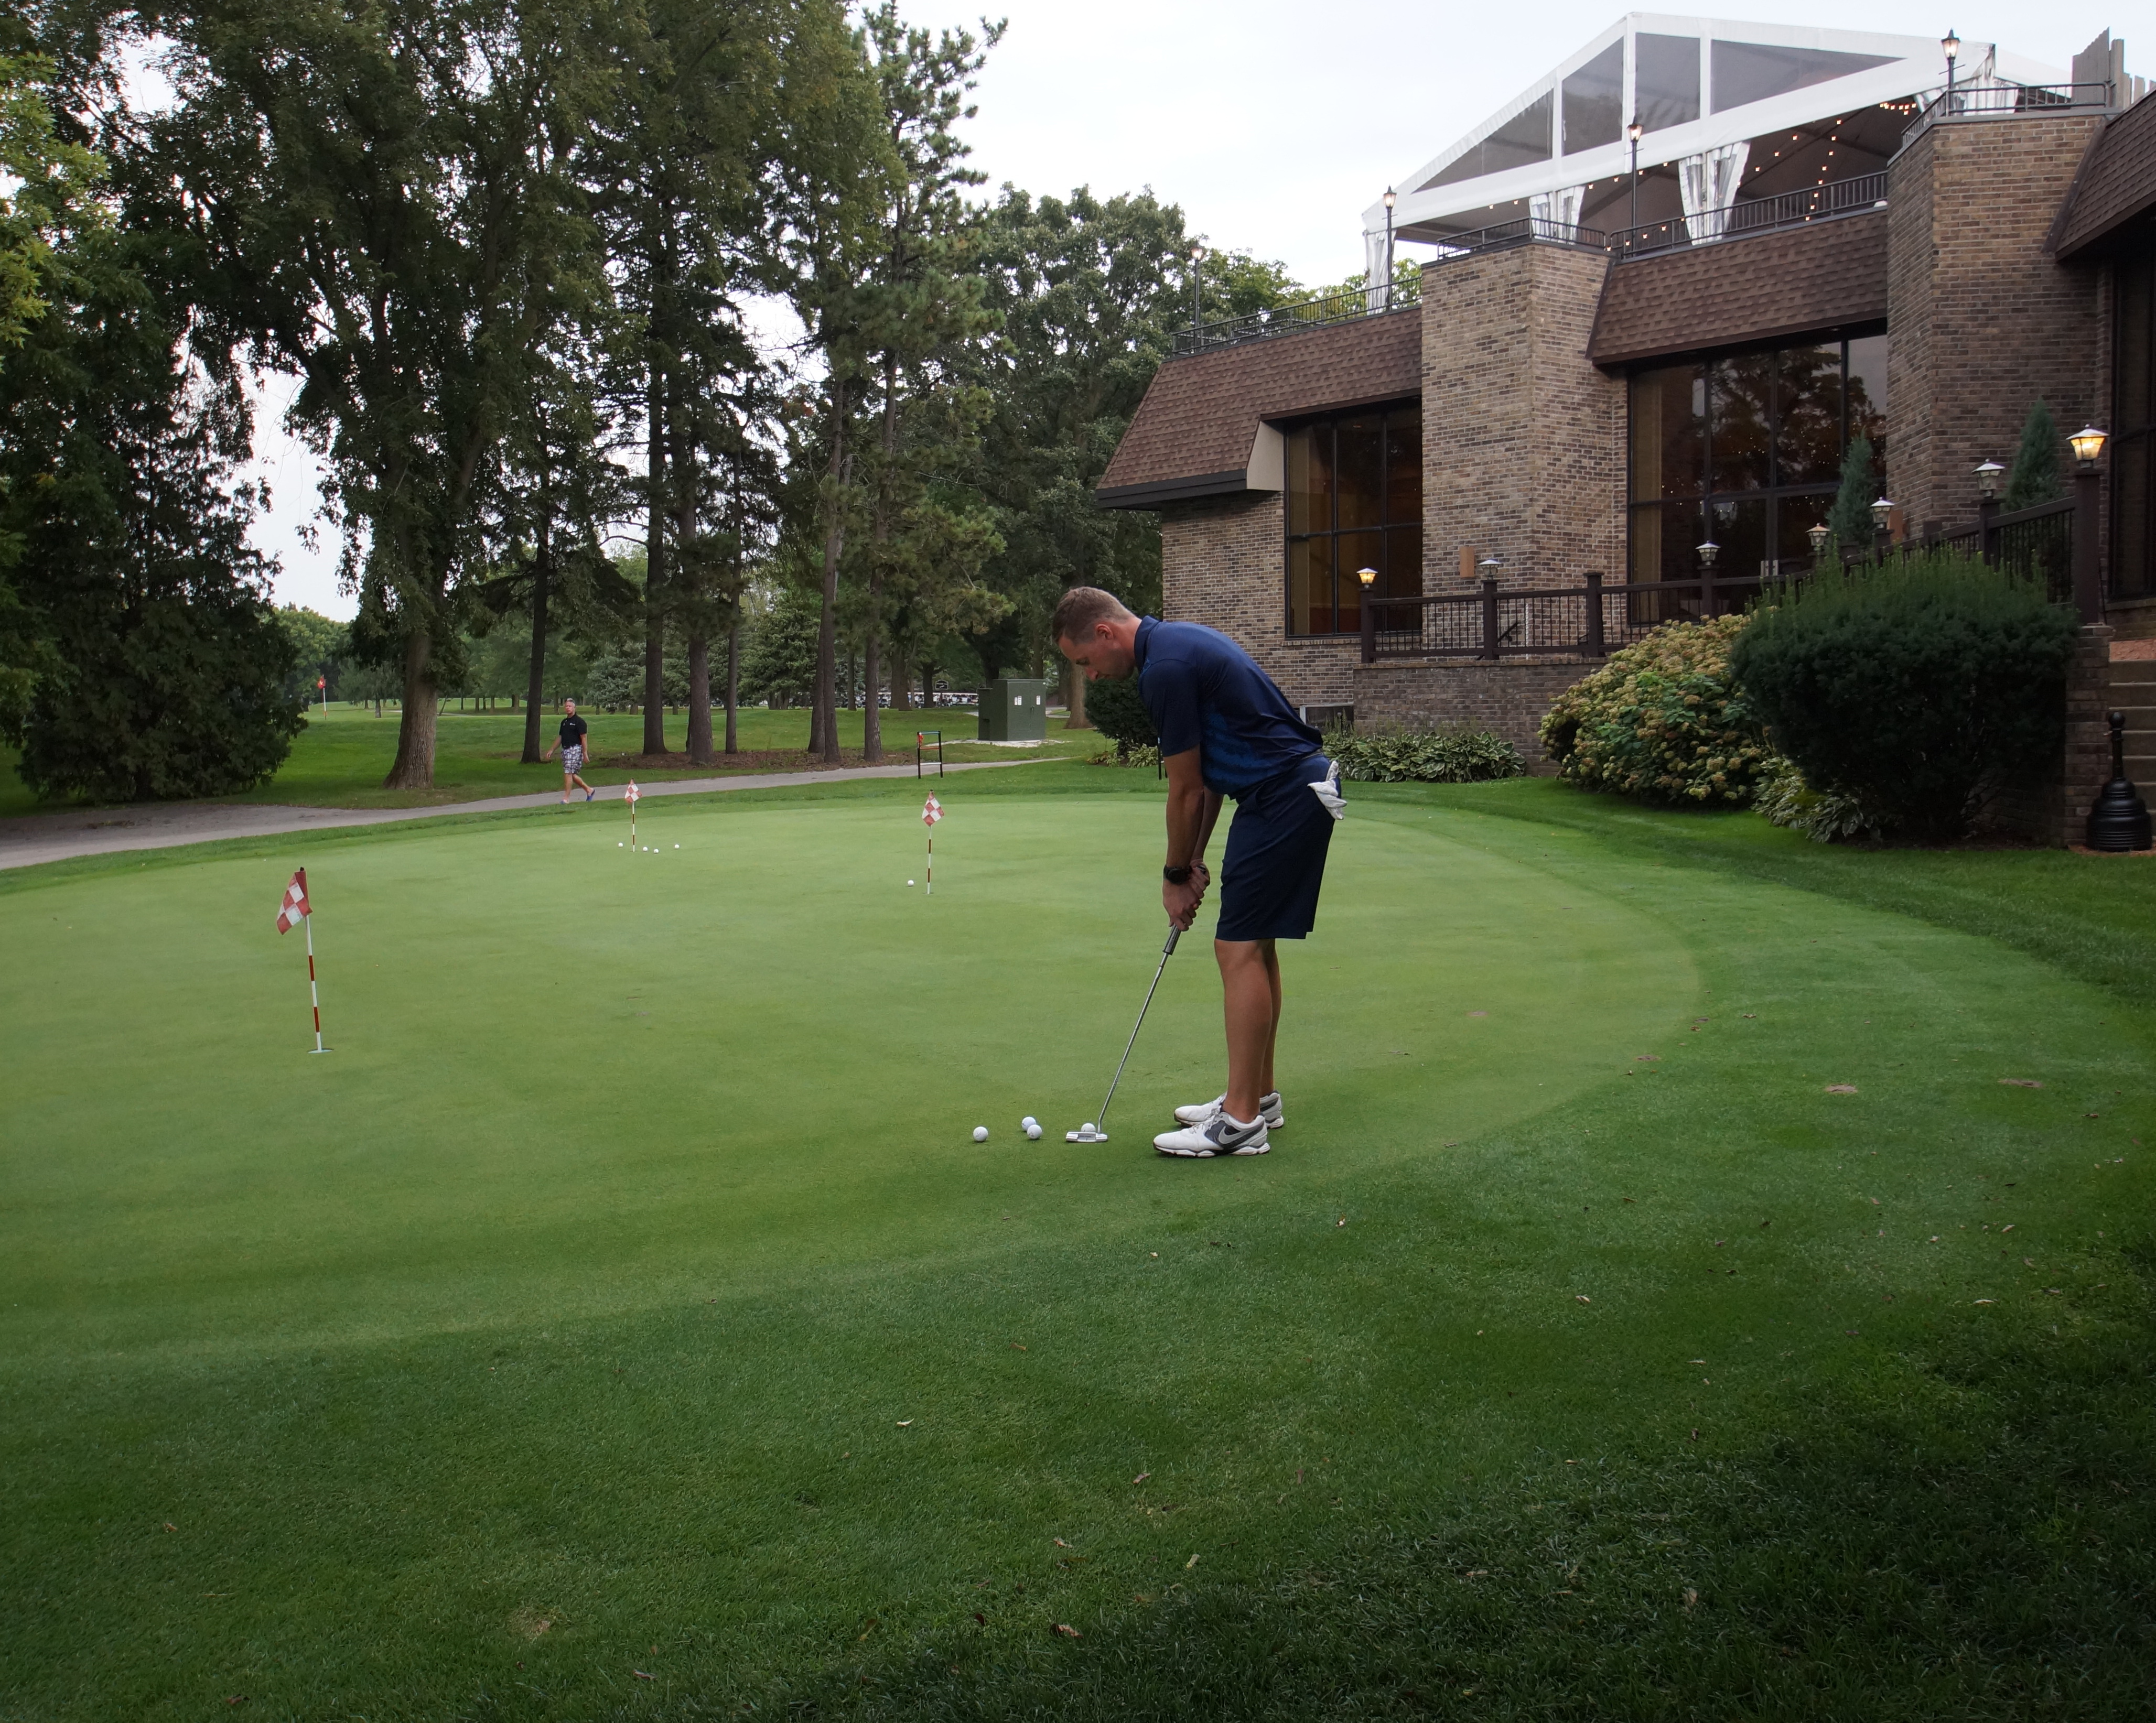 A man stands ready to putt on the putting green.